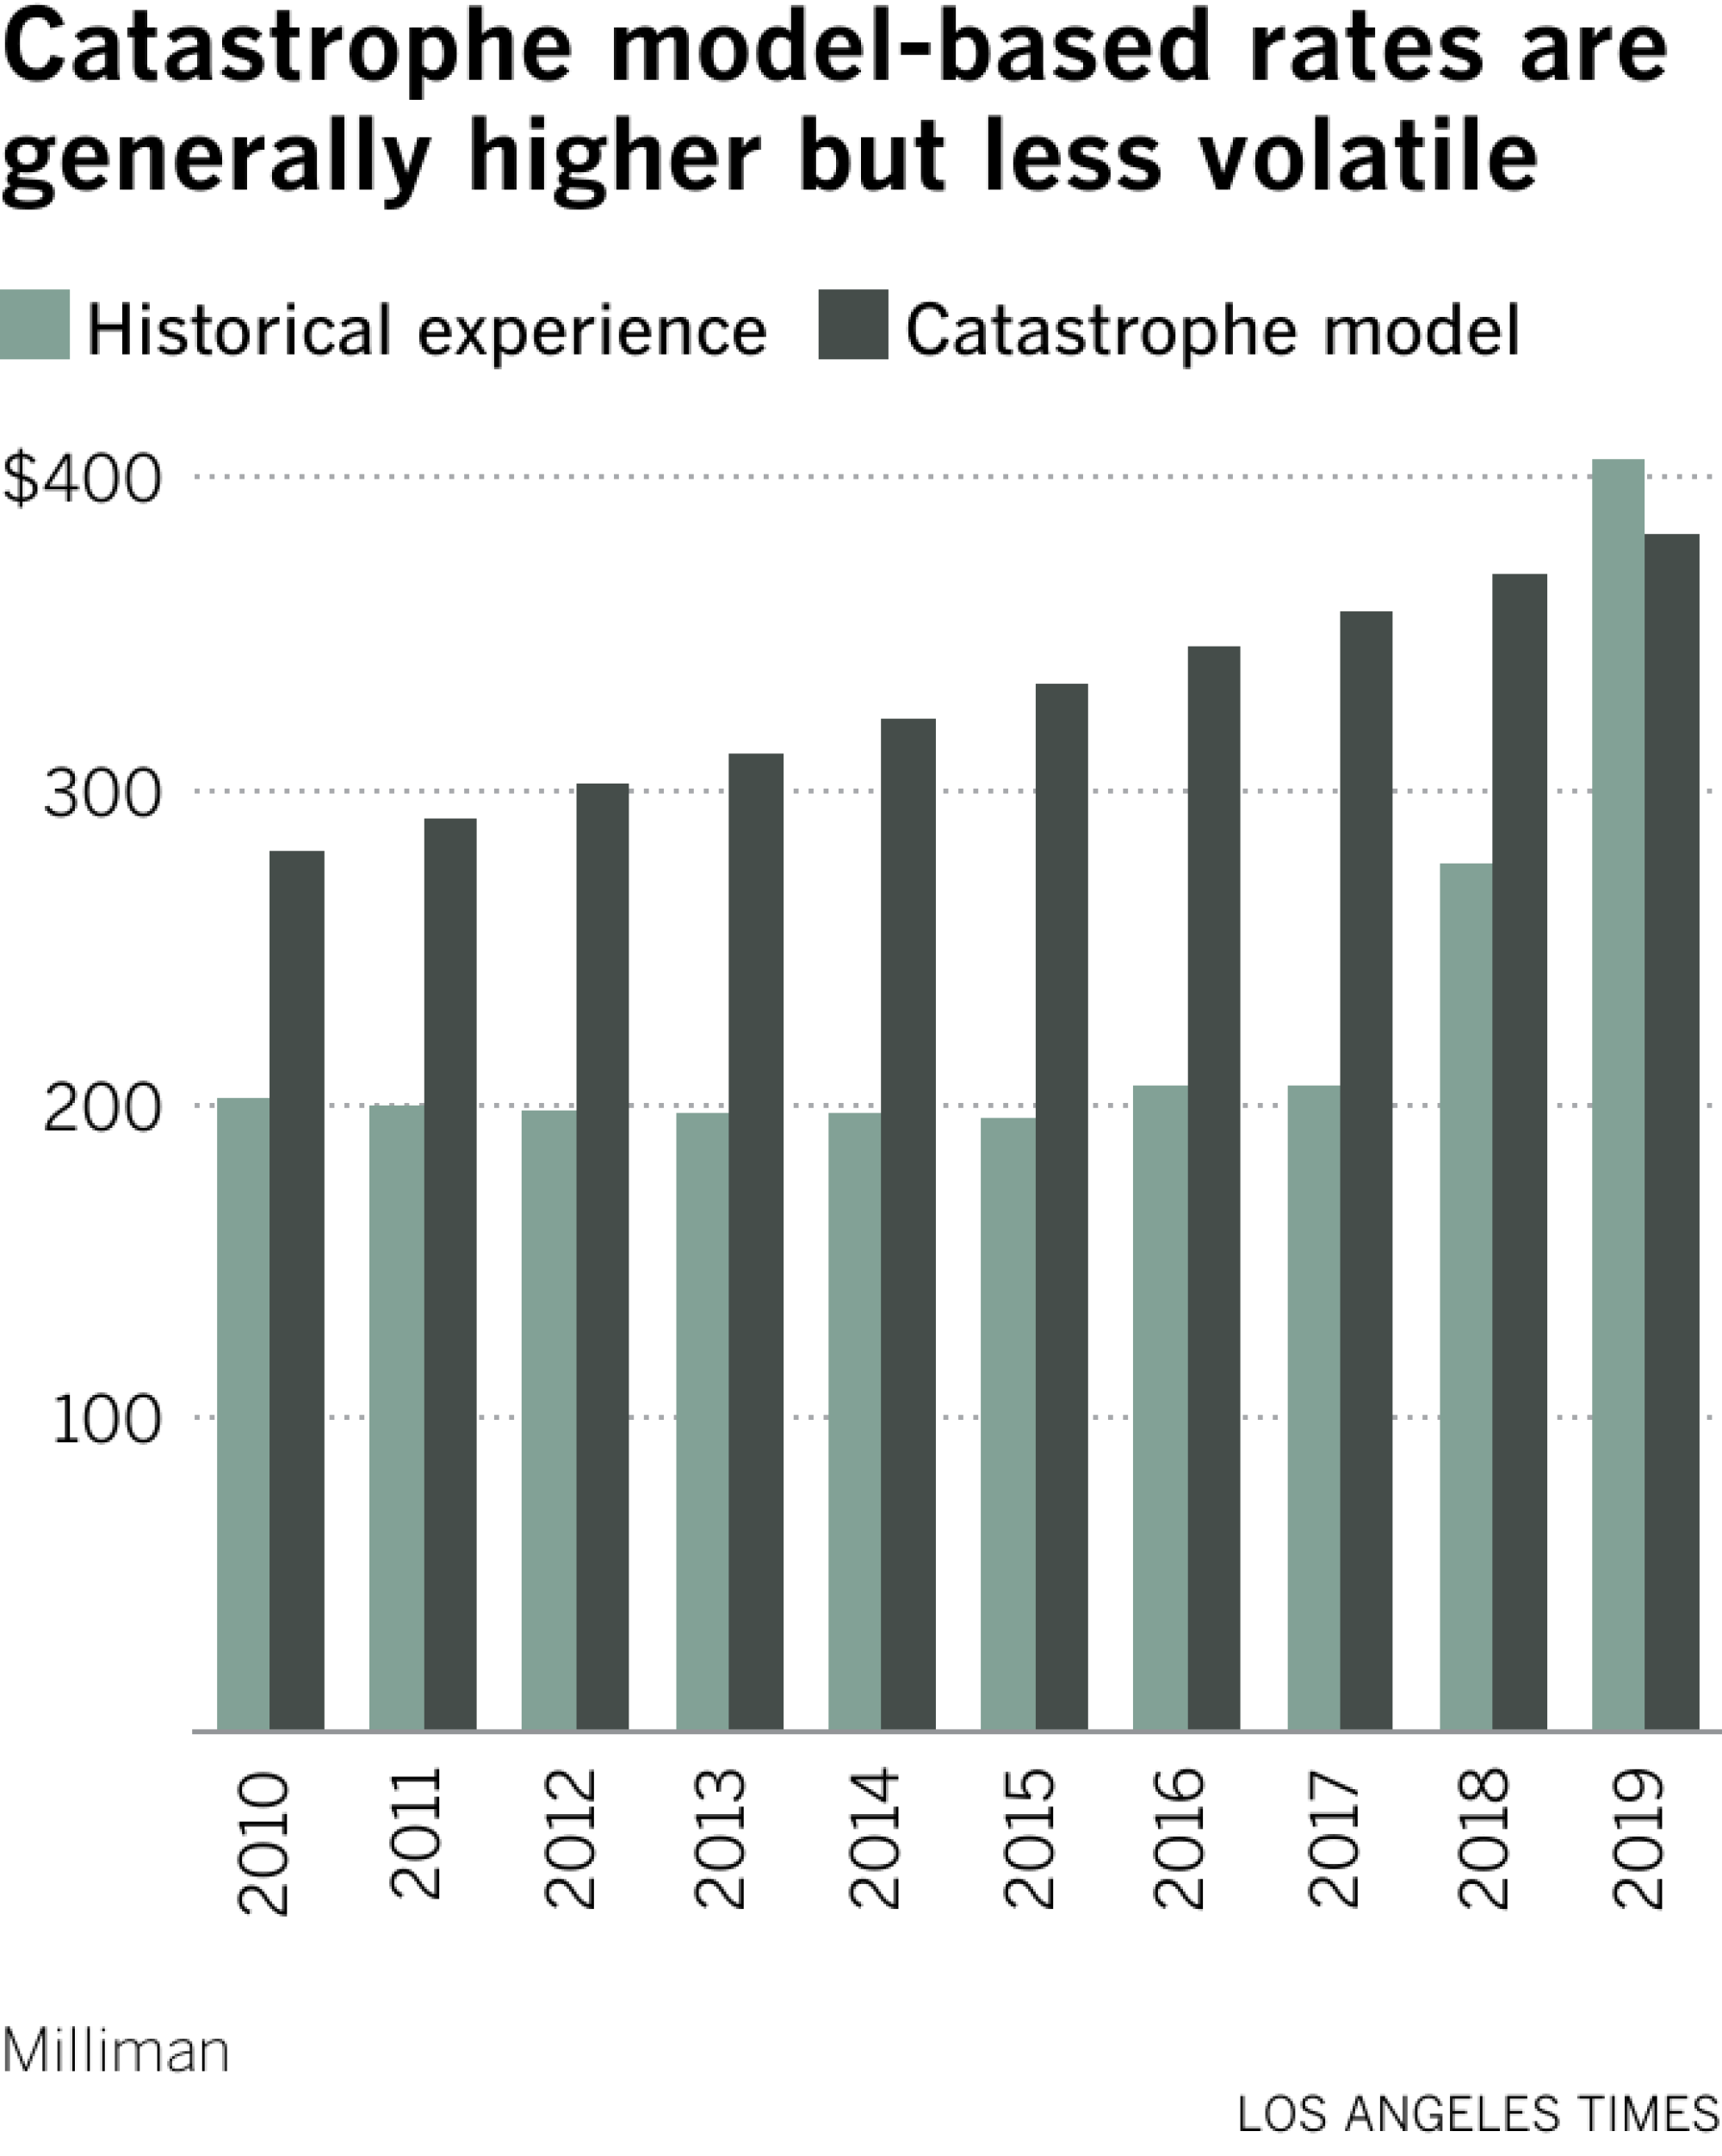 Catastrophe model-based rates are generally higher but less volatile